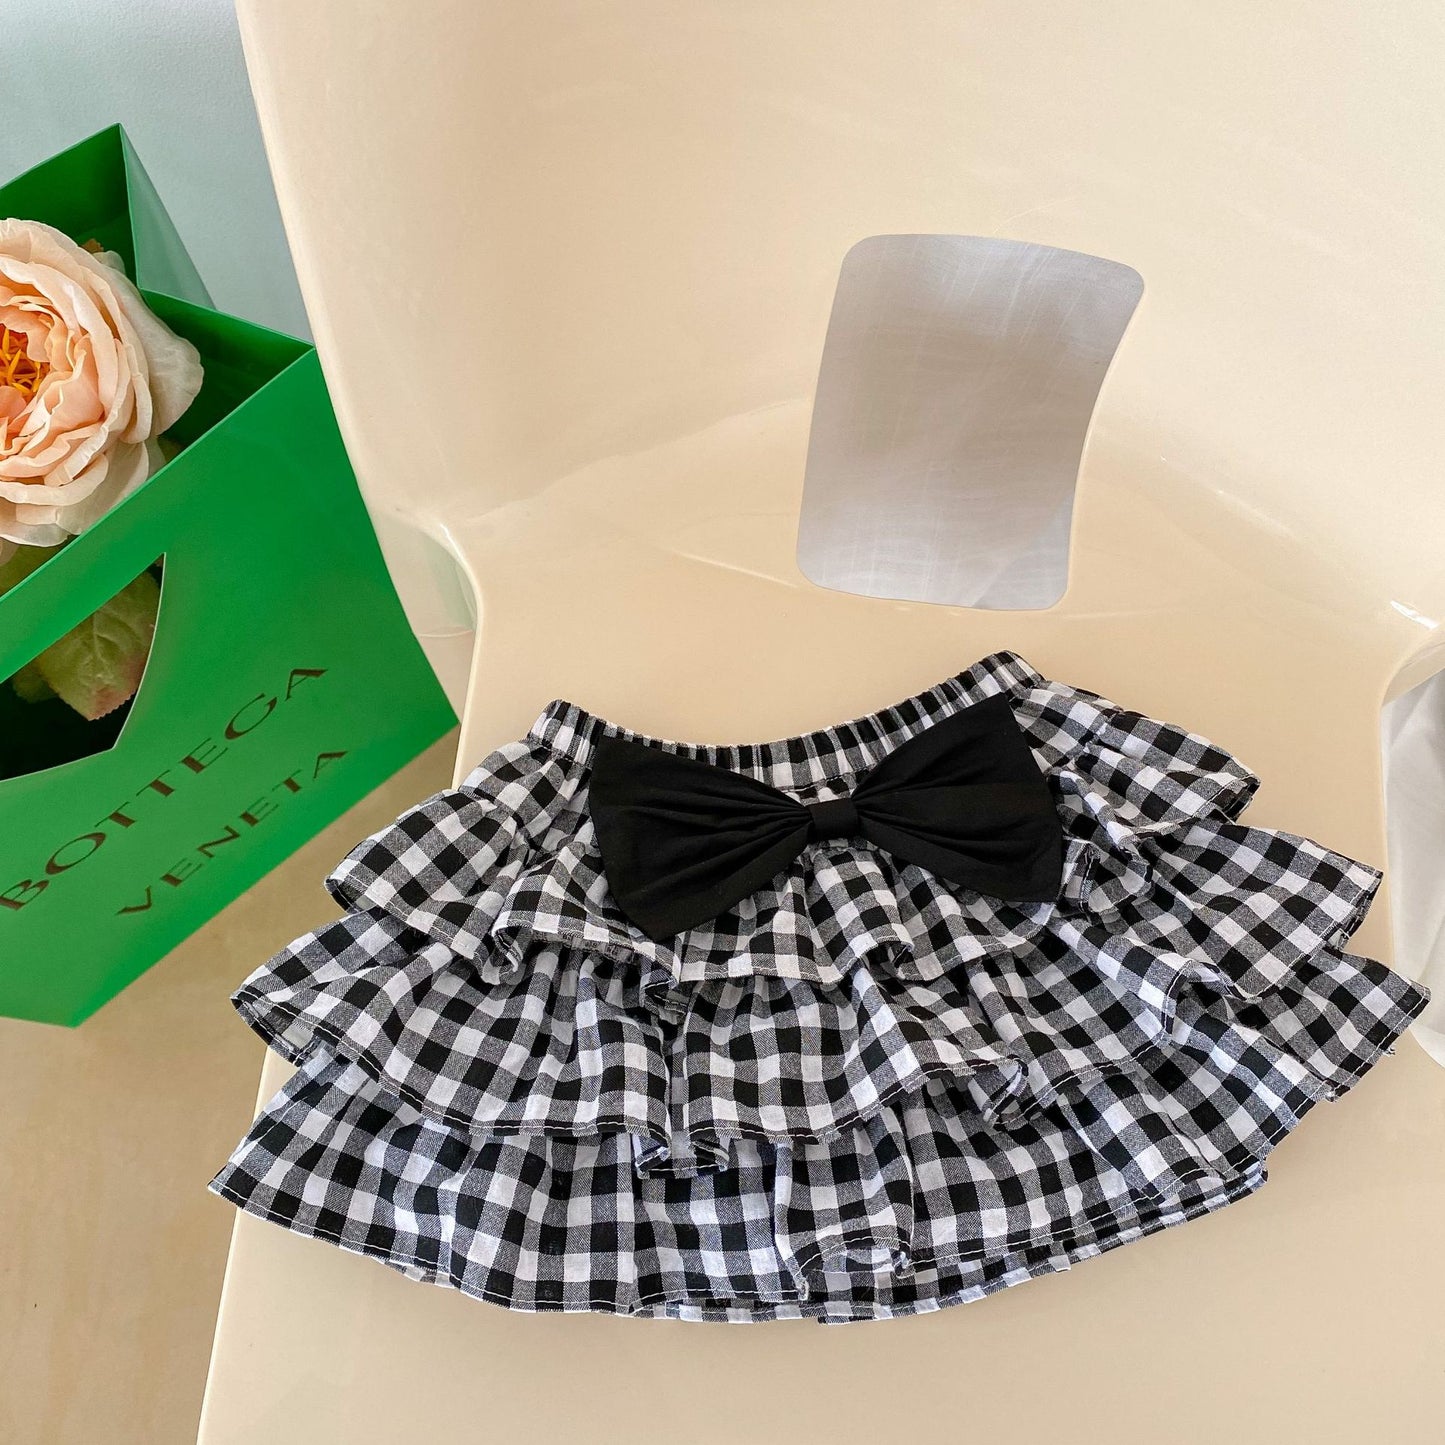 Baby Girl Cherry Laple Neck Shirt With Plaid Skirt Sets